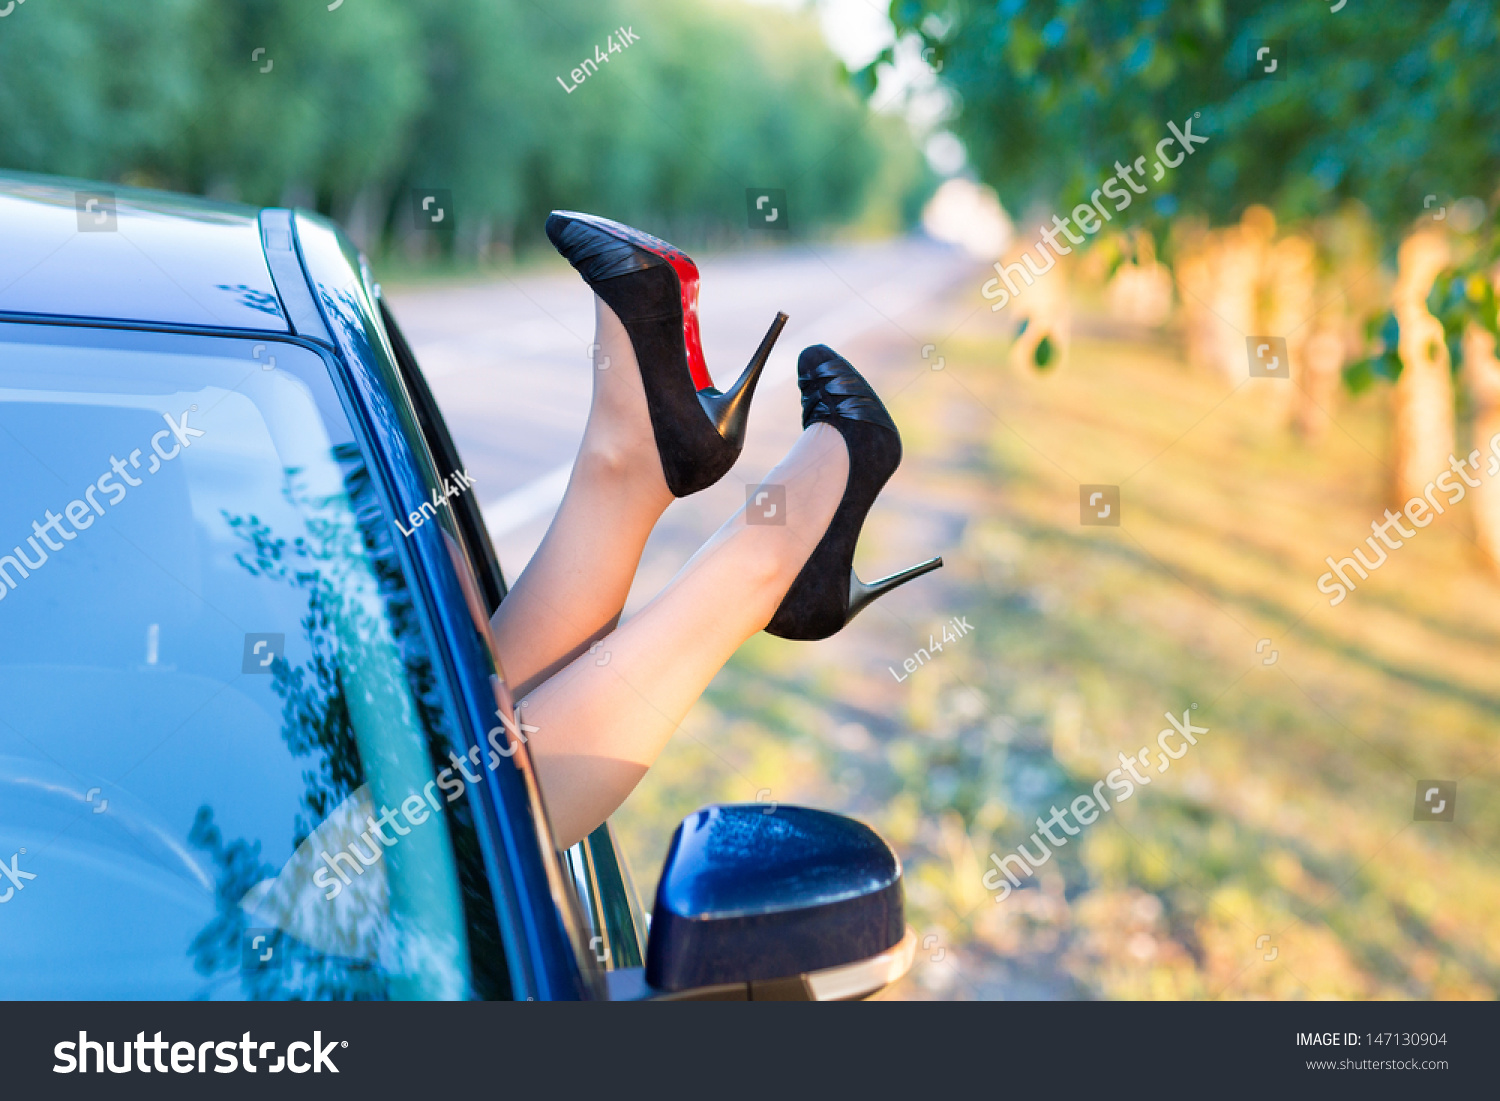 Woman'S Legs In High Heel Shoes Out In A Car Window Outdoor Stock Photo ...